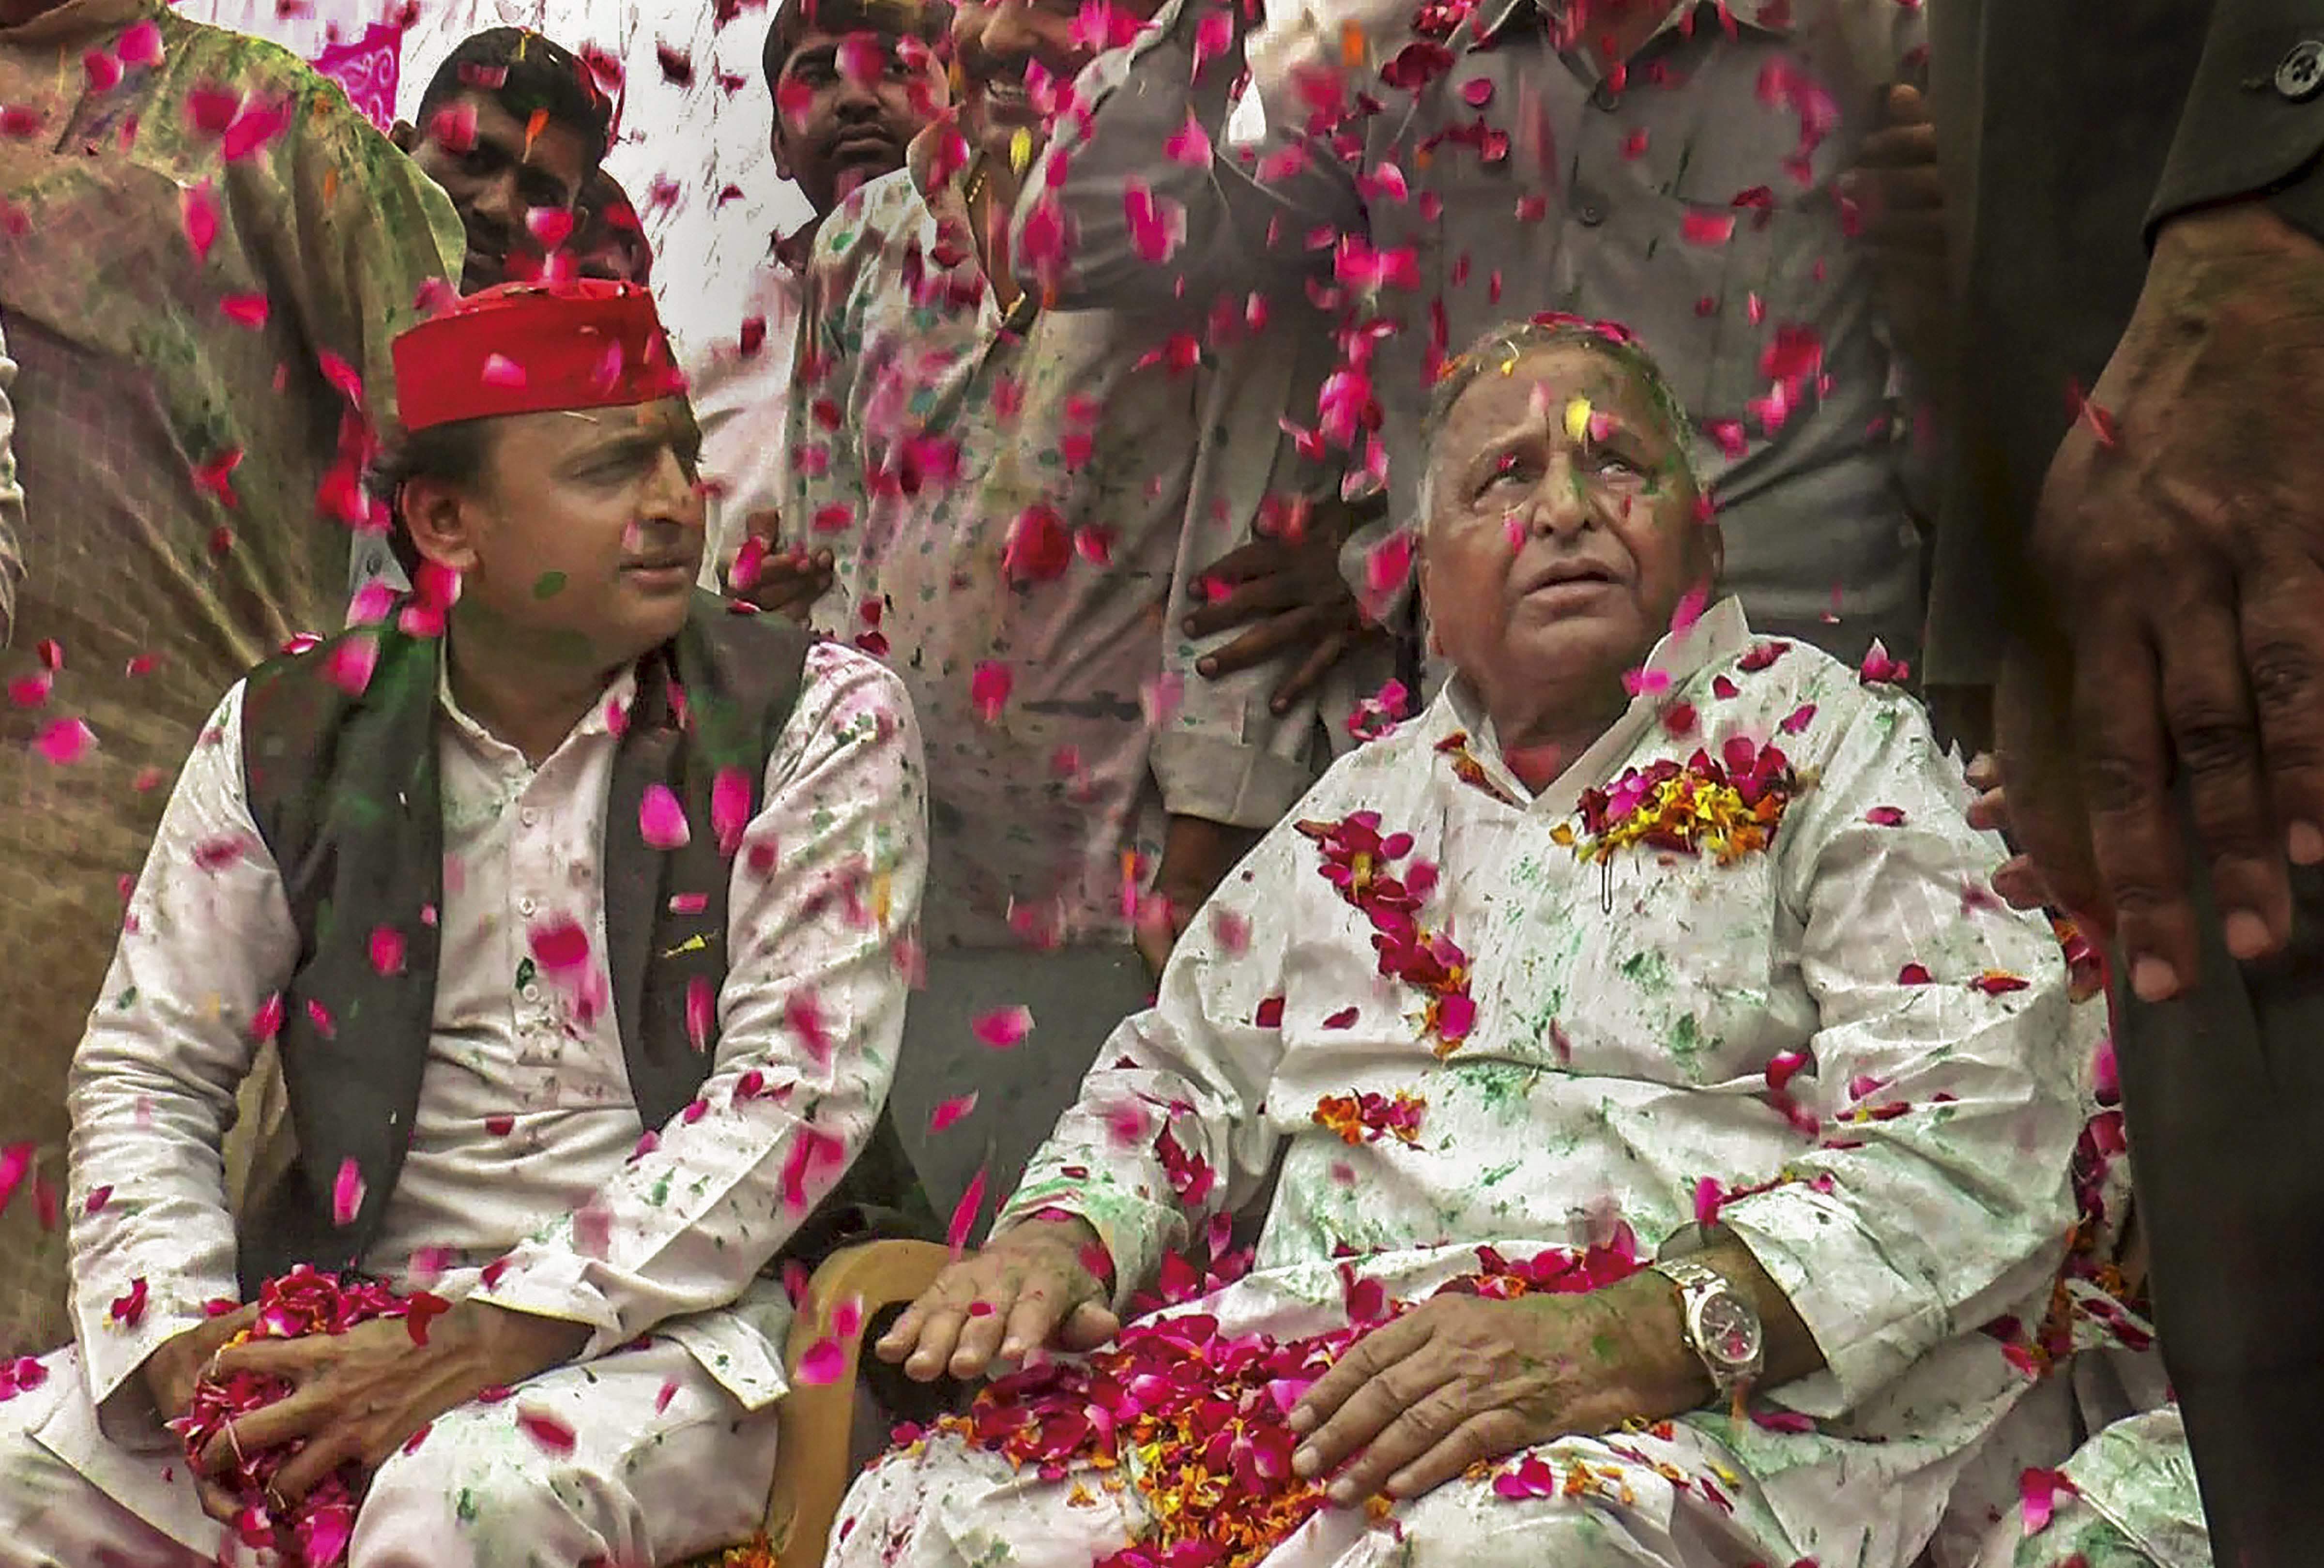 A Look At Iconic Moments From Sp Patriarch Mulayam Singh Yadav S Life In Pics News18